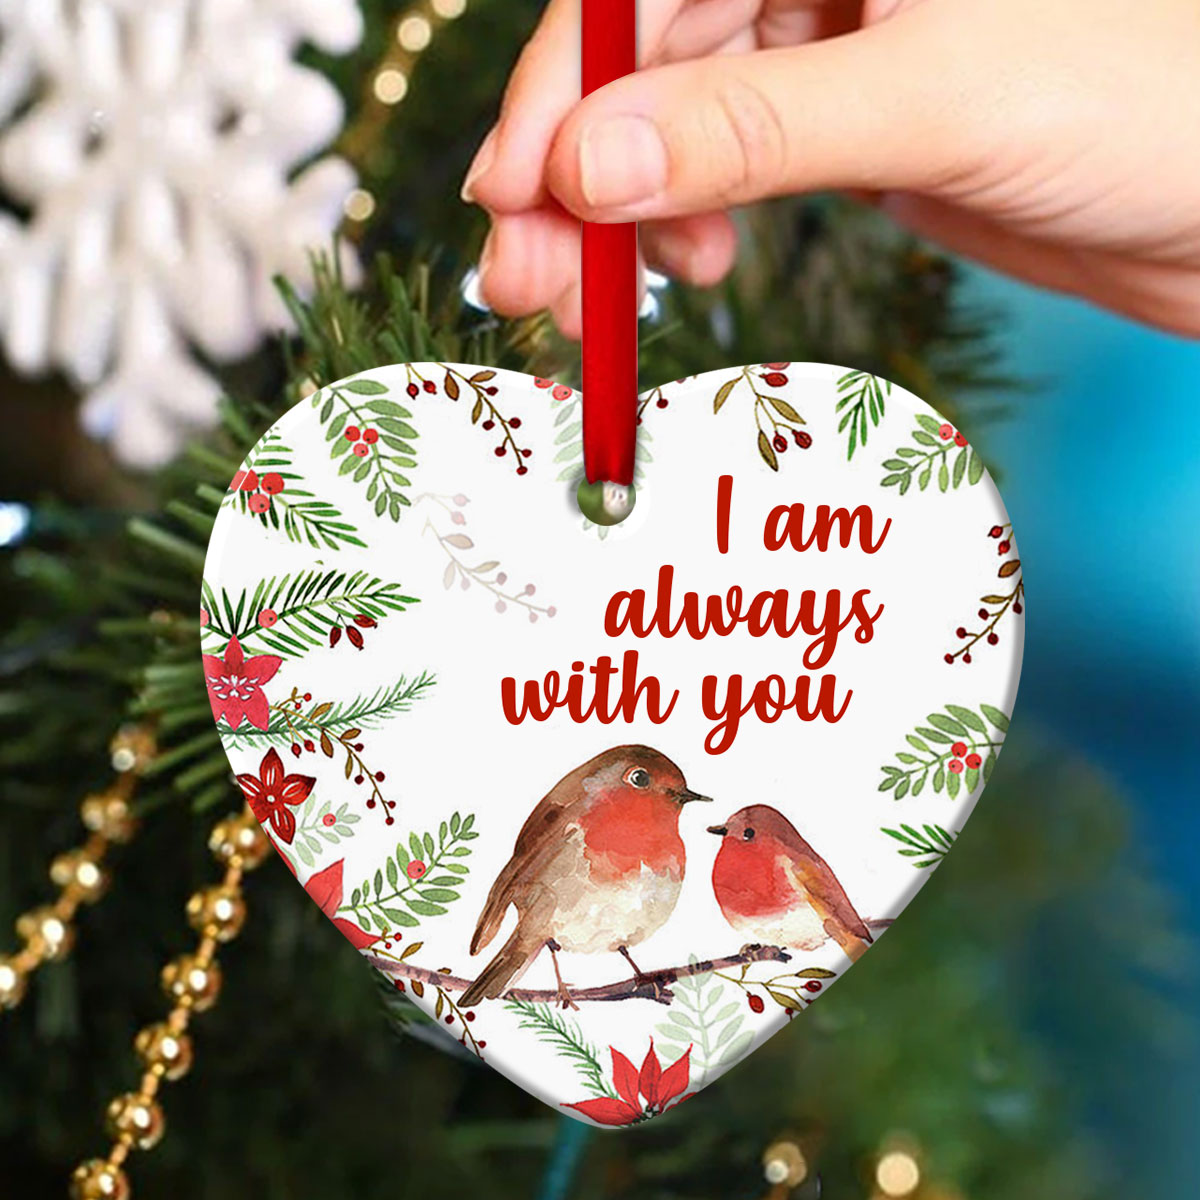 I Am Always With You - Lovely Robin Redbreast Ceramic Heart Ornament - Christmas Decor - Funny Ornament